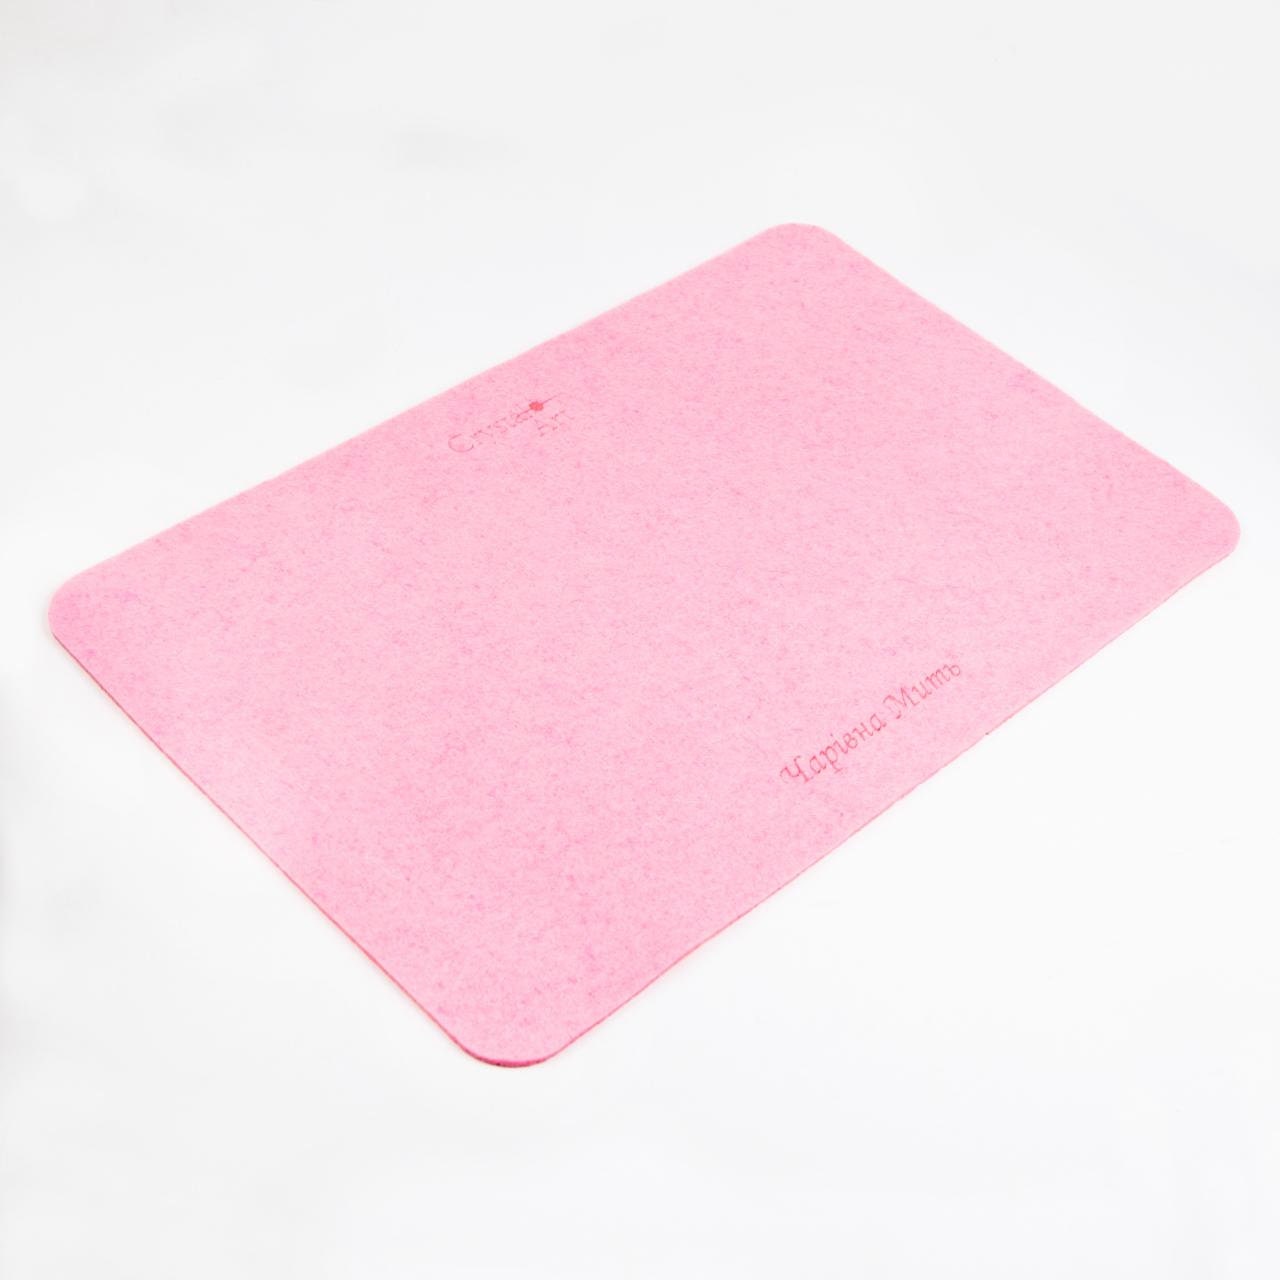 Bead Mat 9,515 Inches, Double-sided 1 Pc, Accessory for Working